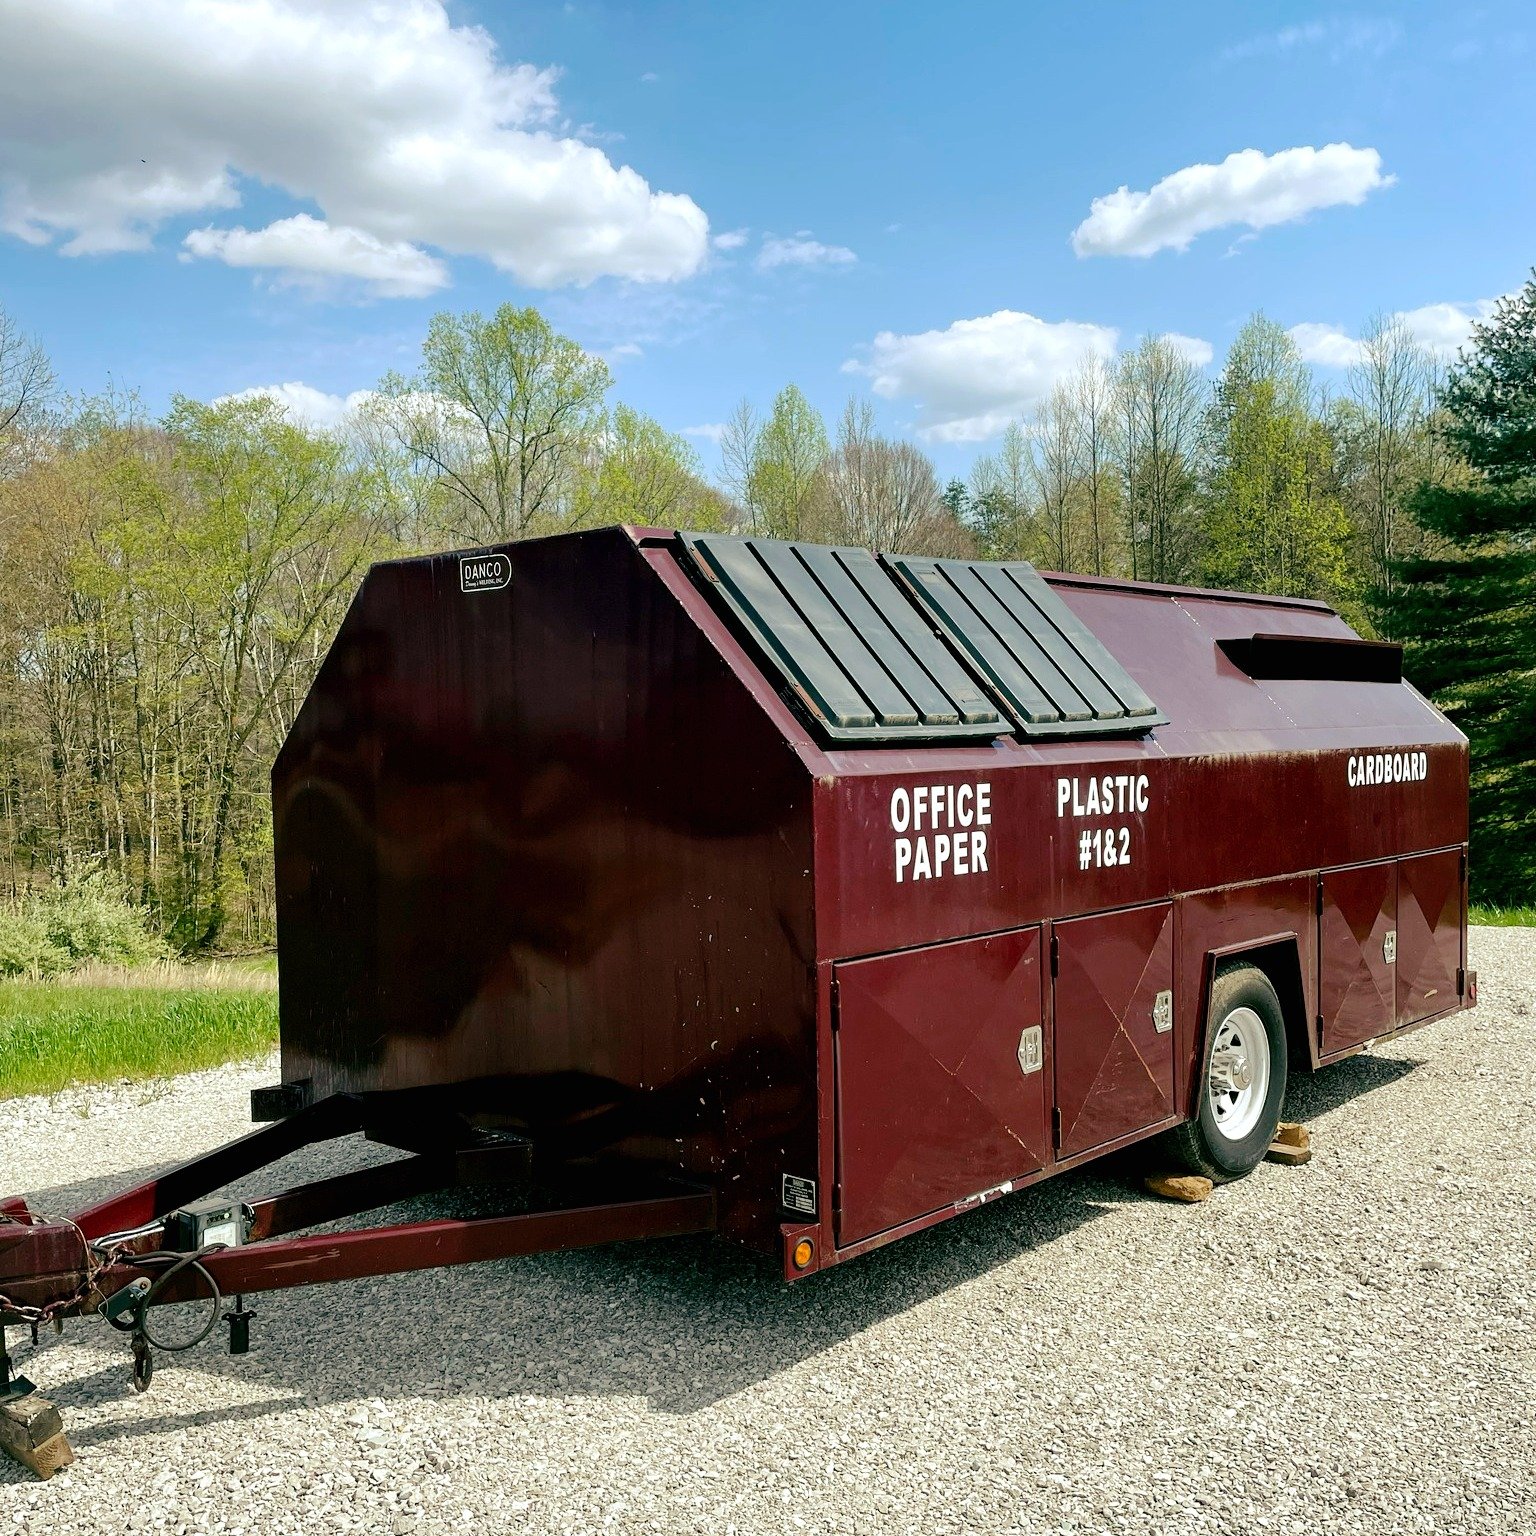 We're thrilled to announce the arrival of our new recycling trailer at Firefly Hills! ♻️ 

This addition will make a significant impact by allowing us to efficiently collect and transport recyclables to the nearest facility, reducing our environmenta